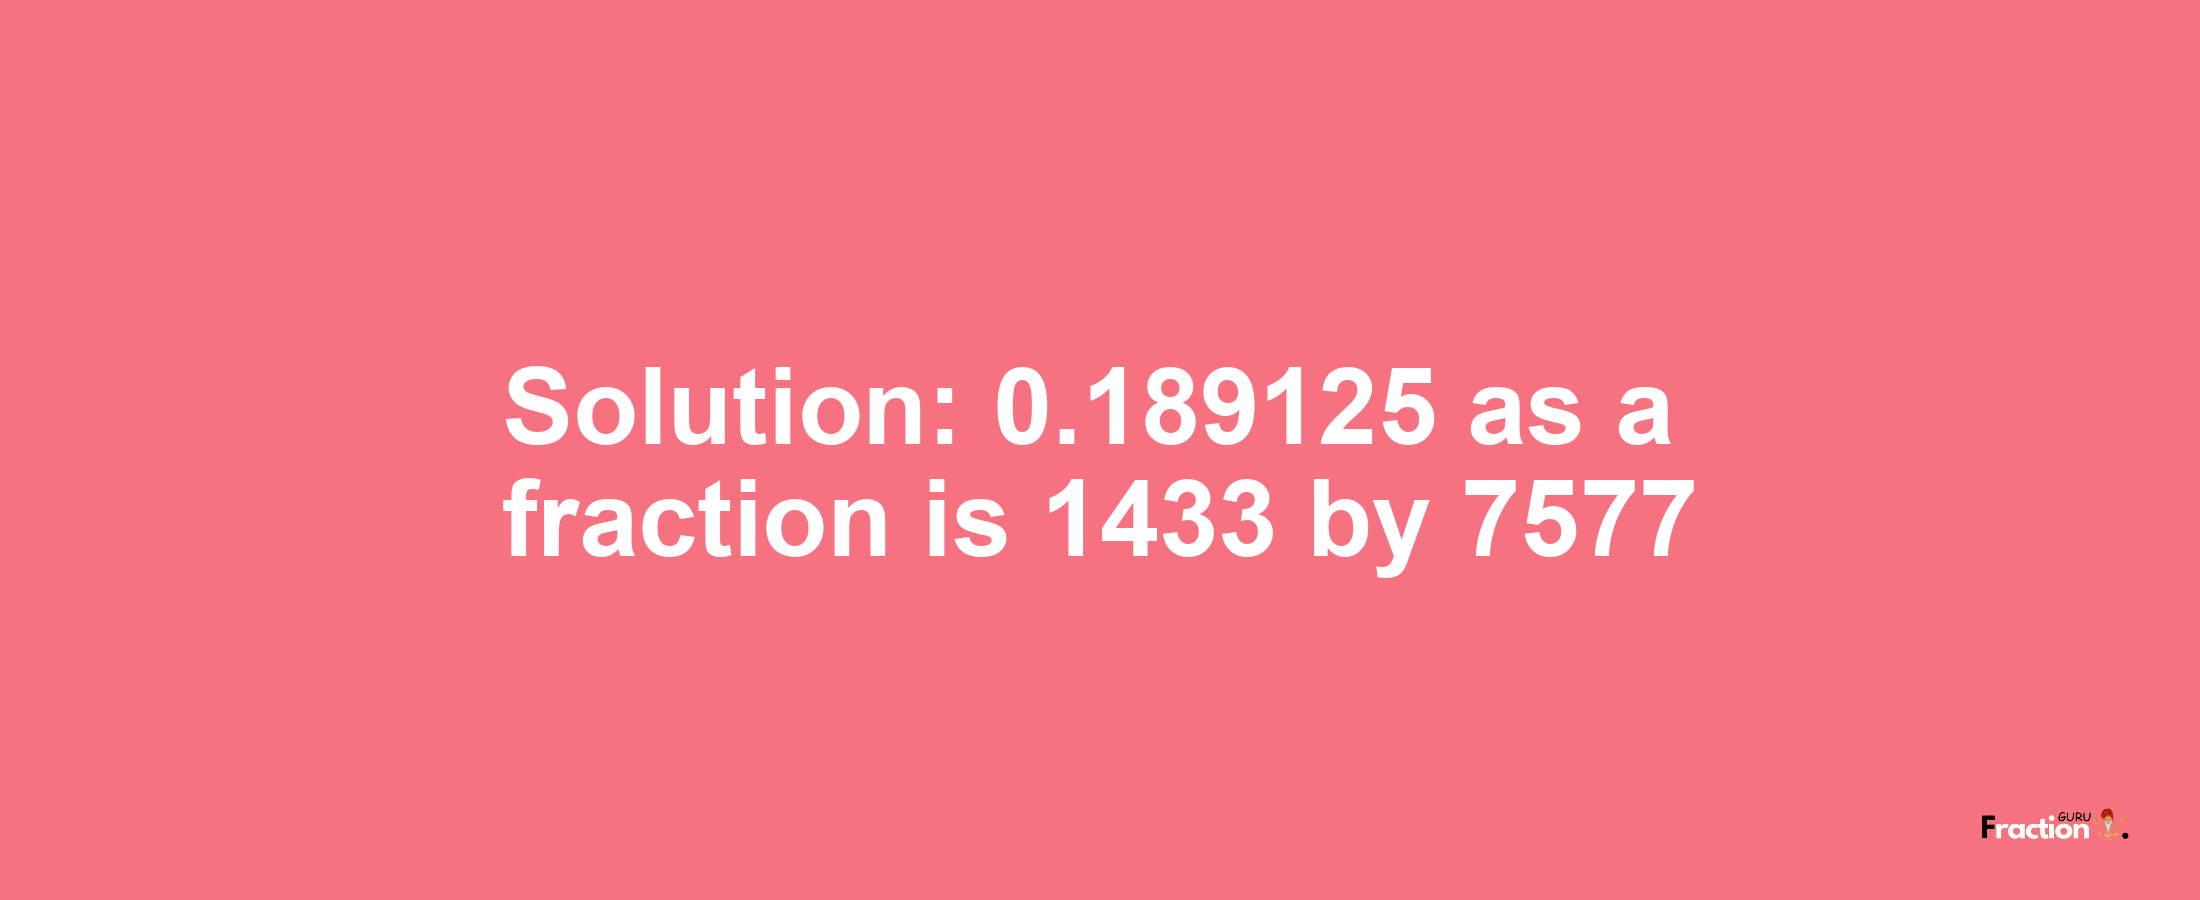 Solution:0.189125 as a fraction is 1433/7577